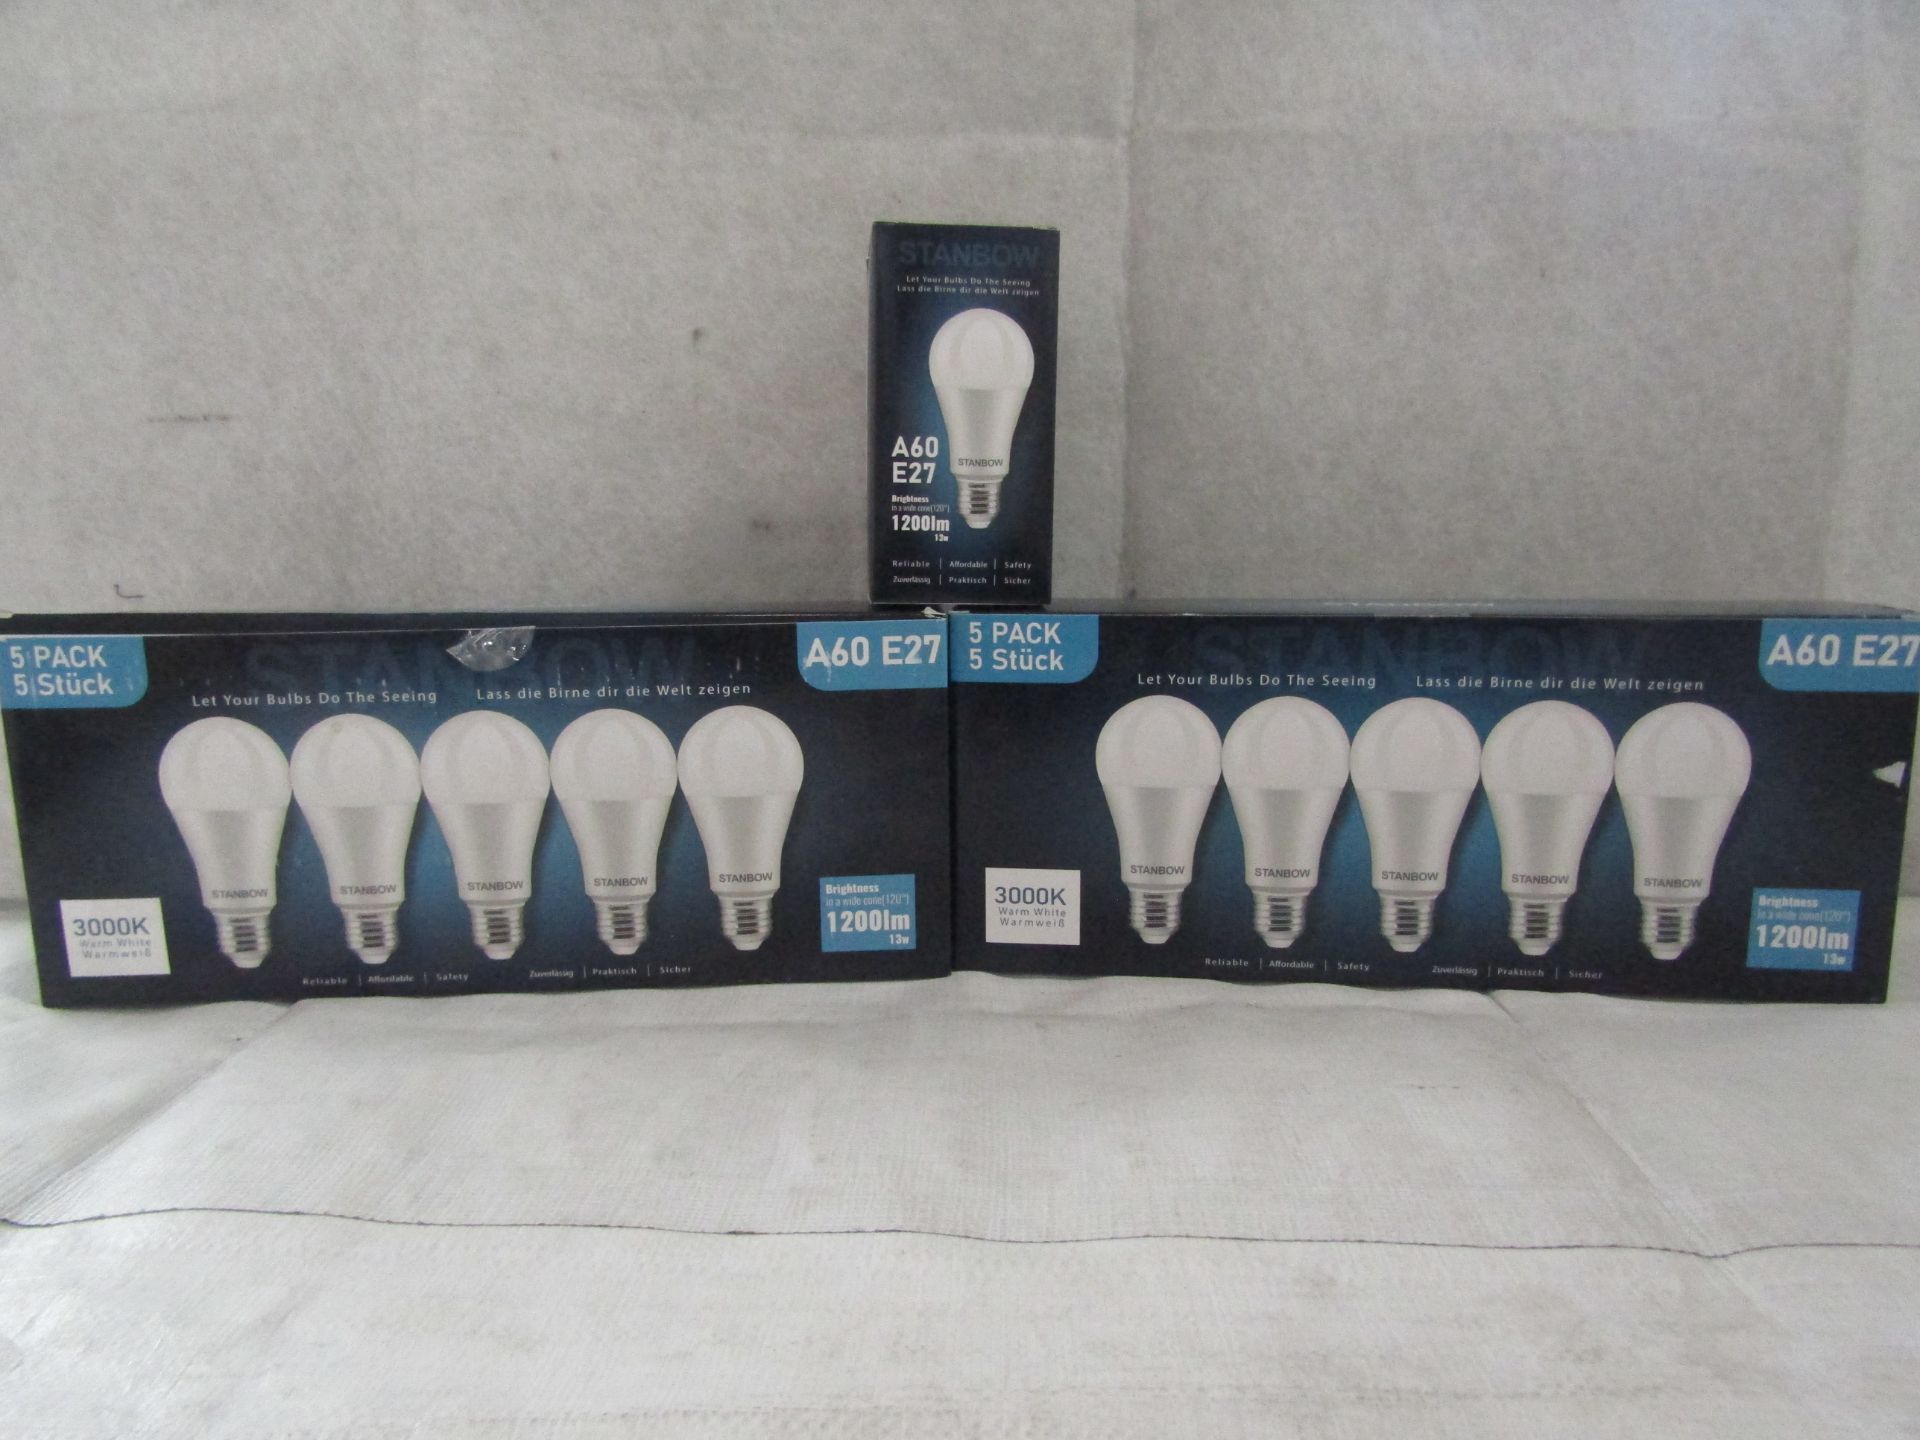 2X STANBOW - A60 E27 1200 Lumen LED Light Bulbs - Pack of 5 - New & Boxed.